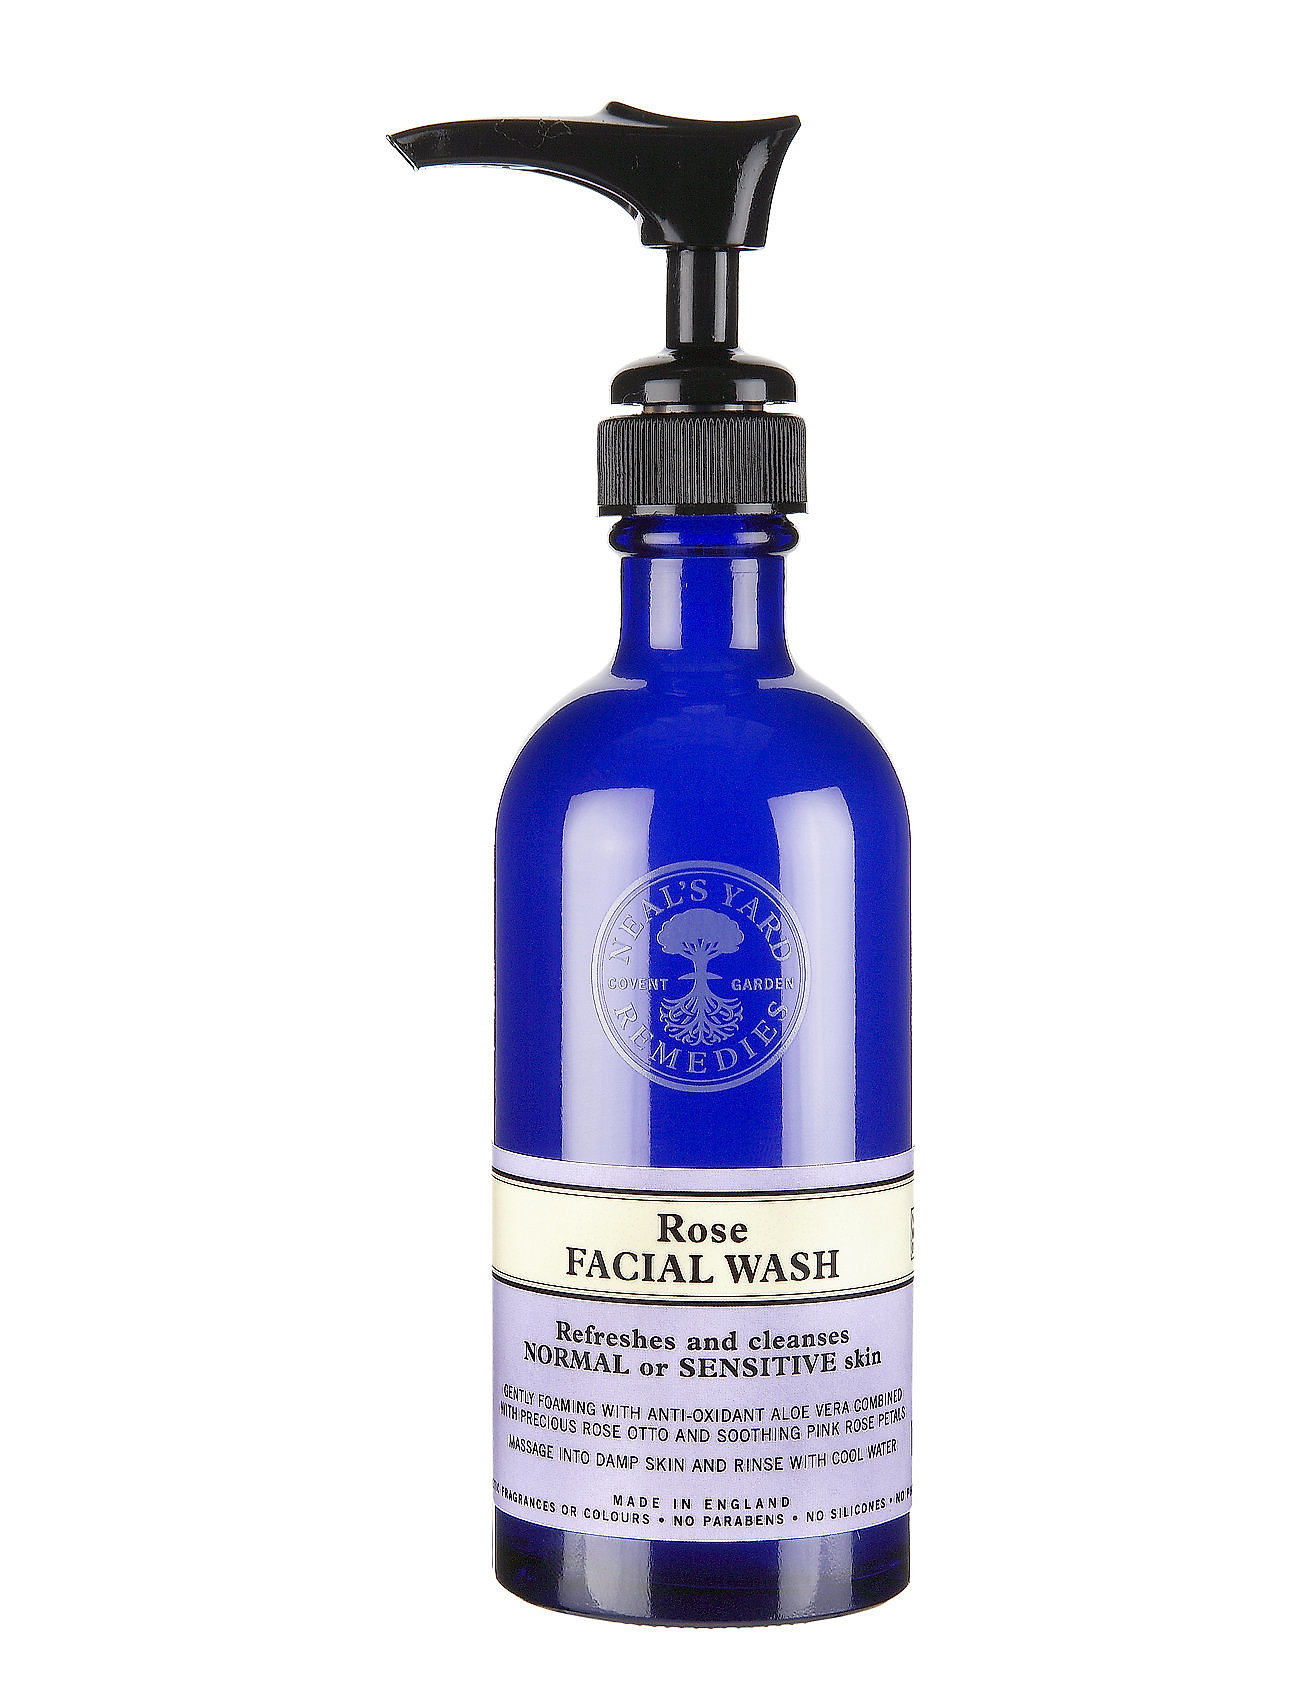 Rehydrating Rose Facial Wash Beauty WOMEN Skin Care Face Cleansers Cleansing Gel Nude Neal's Yard Remedies